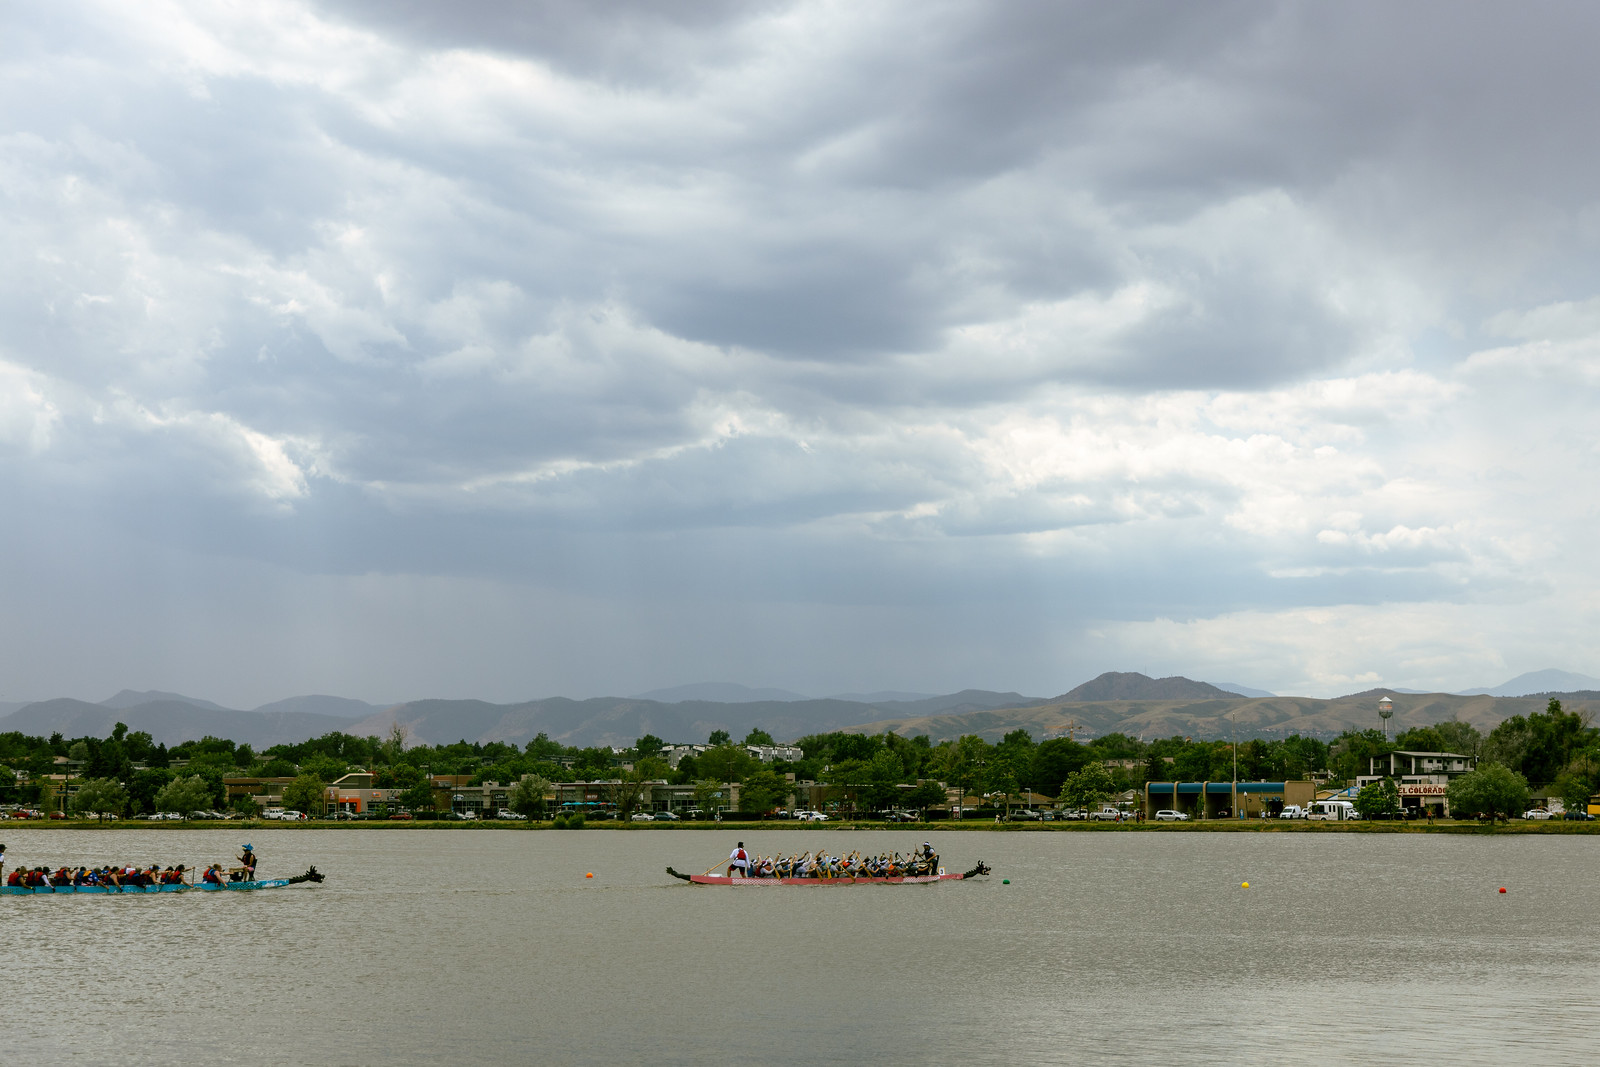 Two long boats each rowed by dozens of people, a red one in the middle of the frame and a green one truncated on the left, two floats on the right, and rain clouds over the mountains in the background